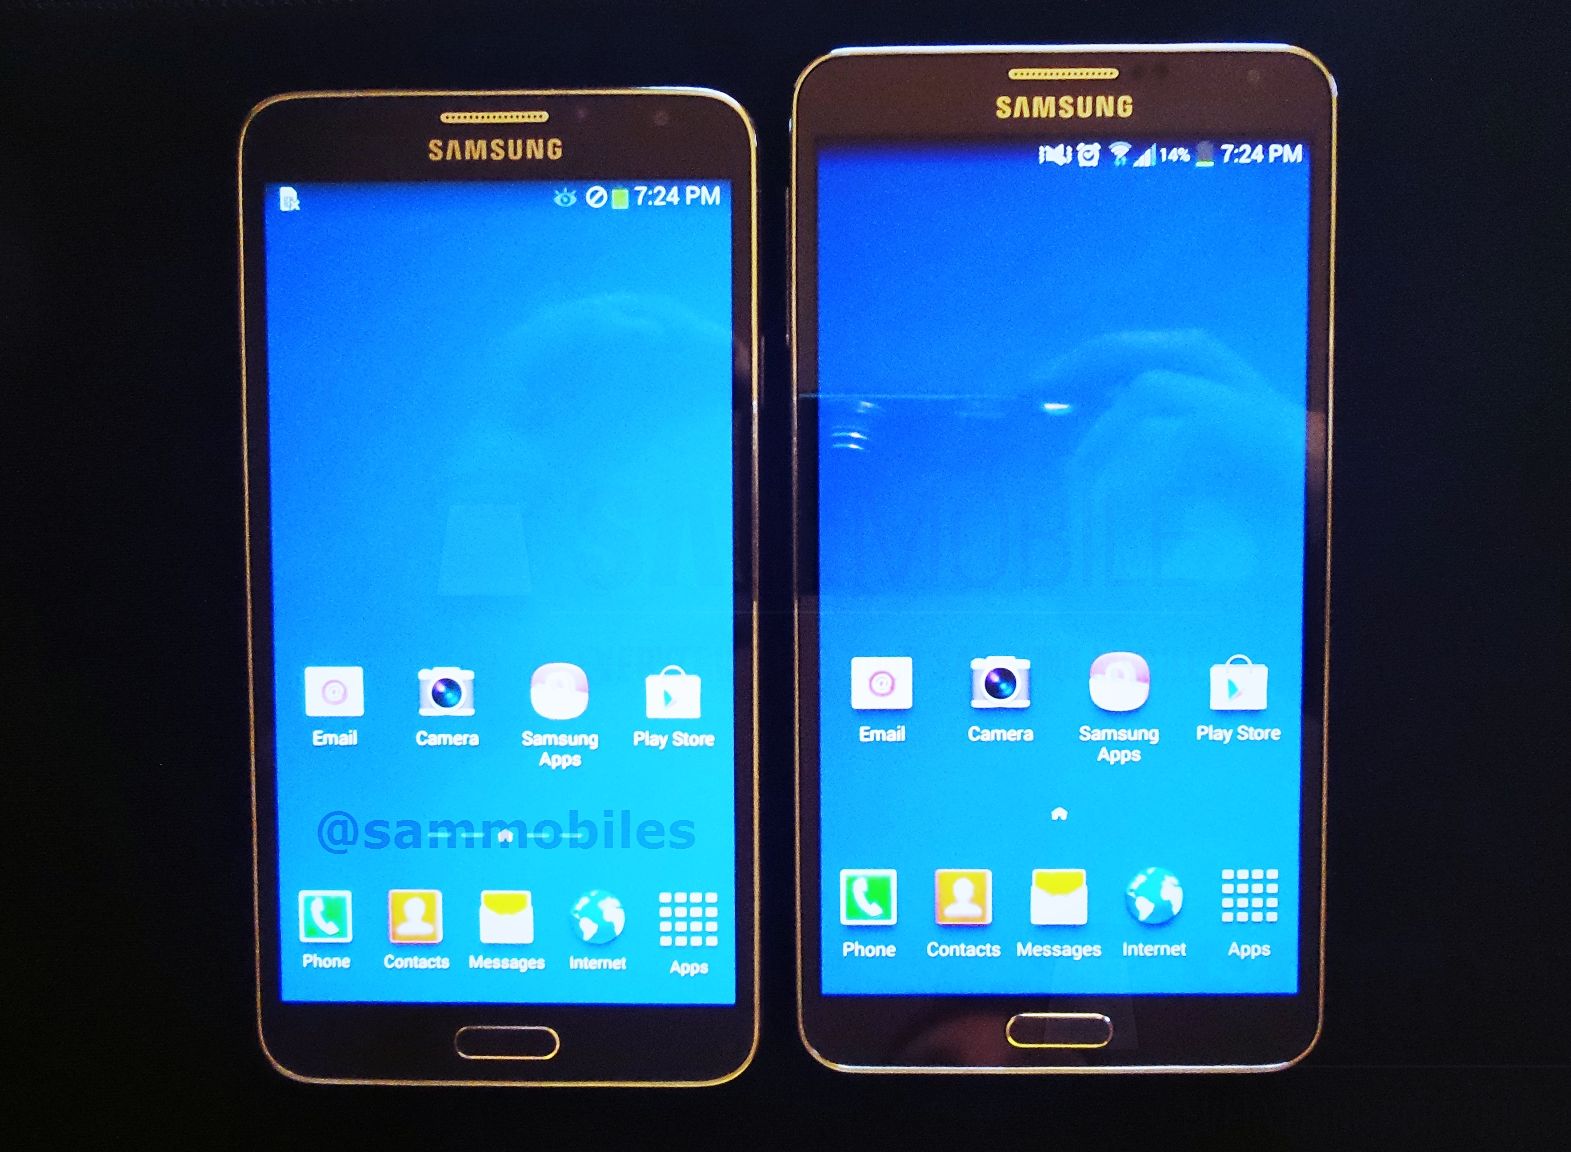 samsung galaxy note 3 lite neo images leak online revealing 5 55 inch 720p display and more image 1